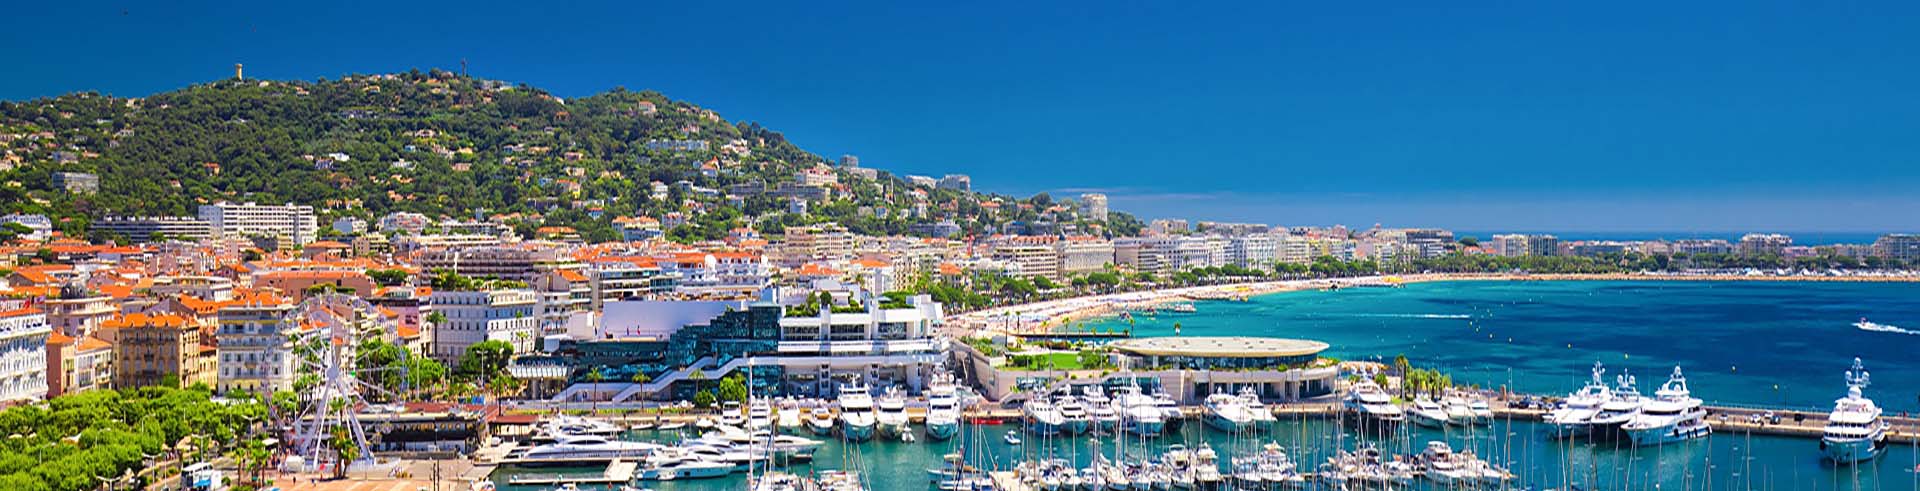 SAVE THE DATE
JOIN US AT DATACLOUD GLOBAL CONGRESS 
ON 4-6 JUNE 2024 IN CANNES, FRANCE
